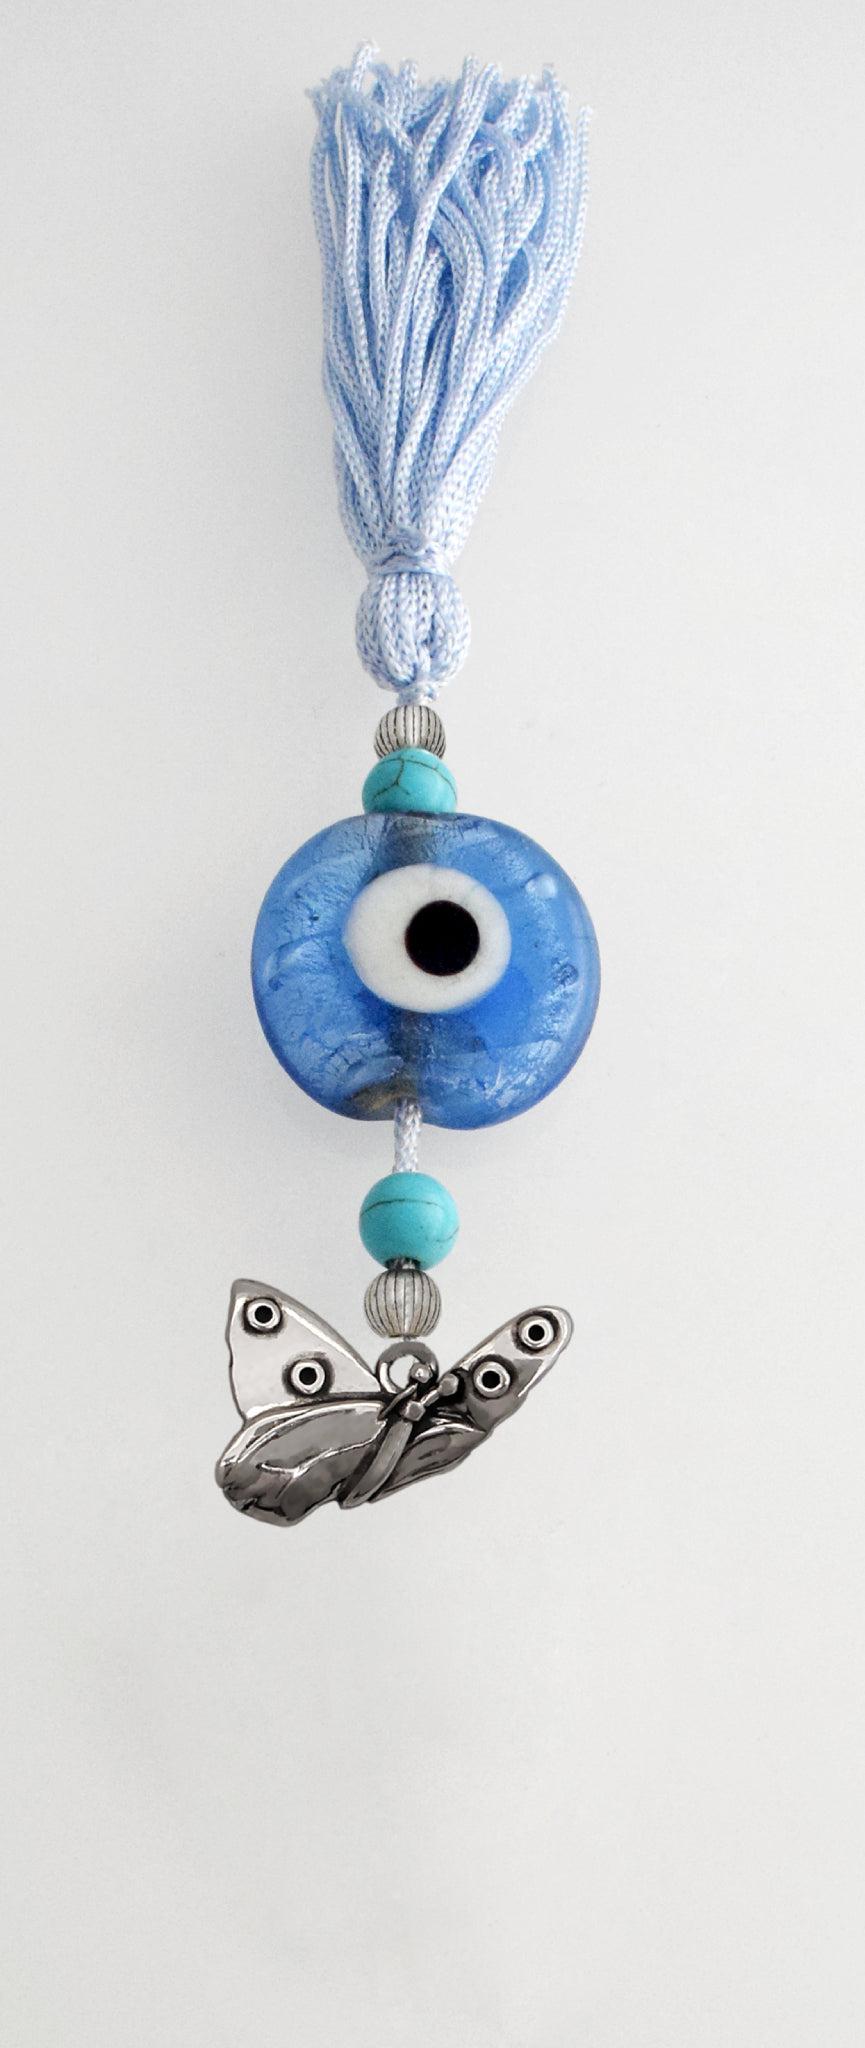 Evil Eye Charm on a tassel, House decoration, holiday decor, welcome gift, silver charm, Butterfly Charm - ELEFTHERIOU EL